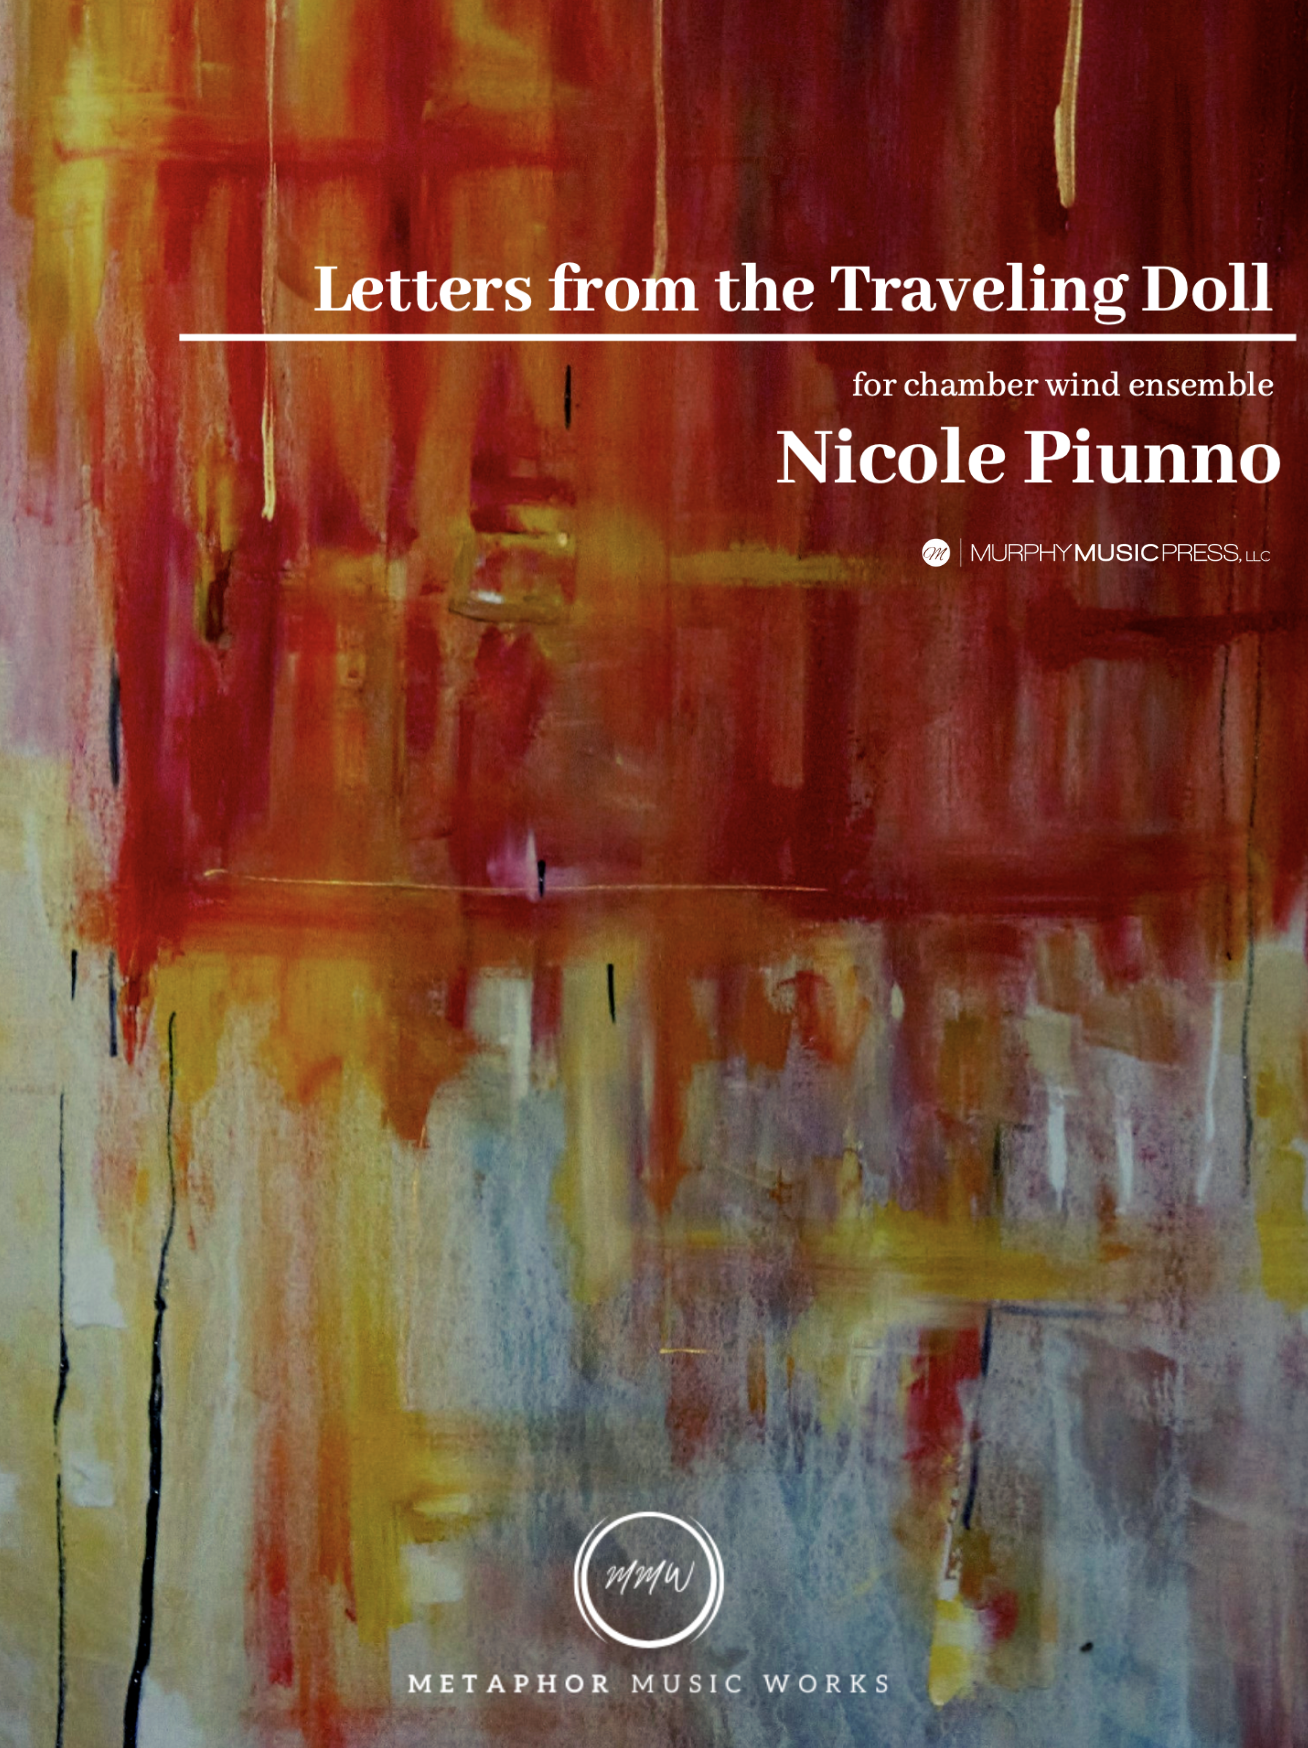 Letters From The Traveling Doll (Score Only) by Nicole Piunno